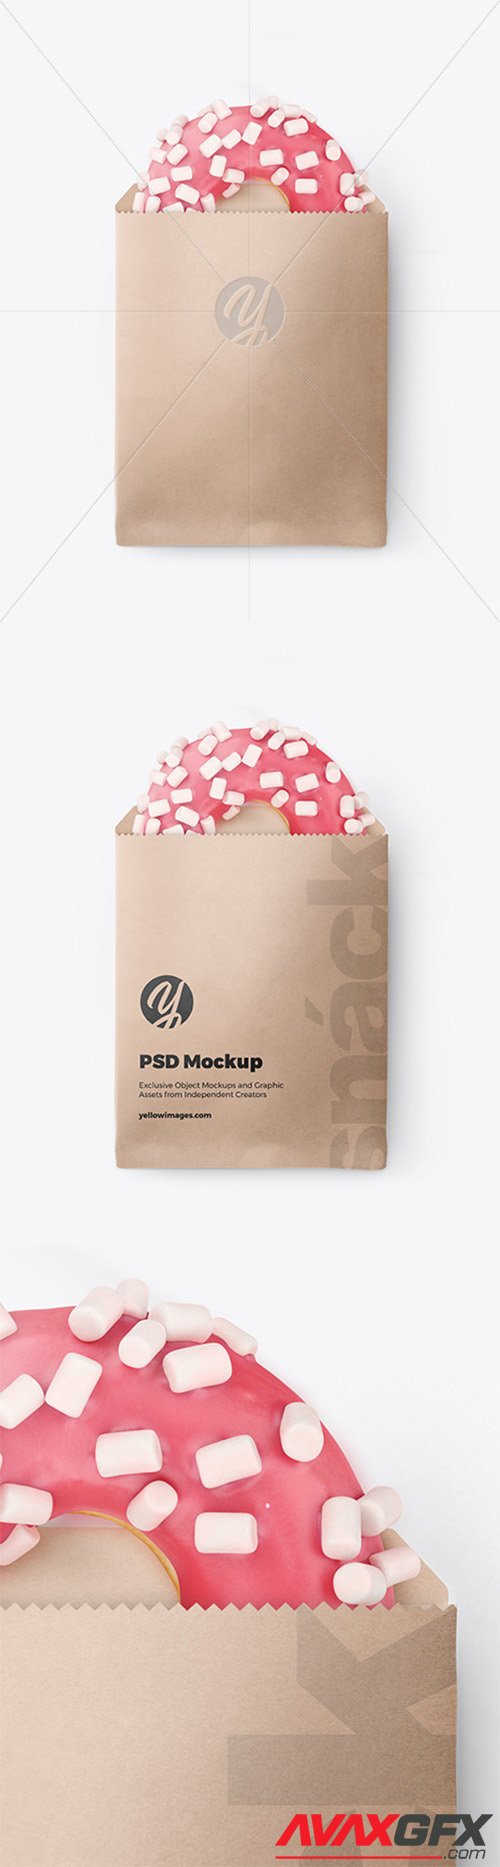 Paper Pack with Pink Glazed Donut Mockup 65070